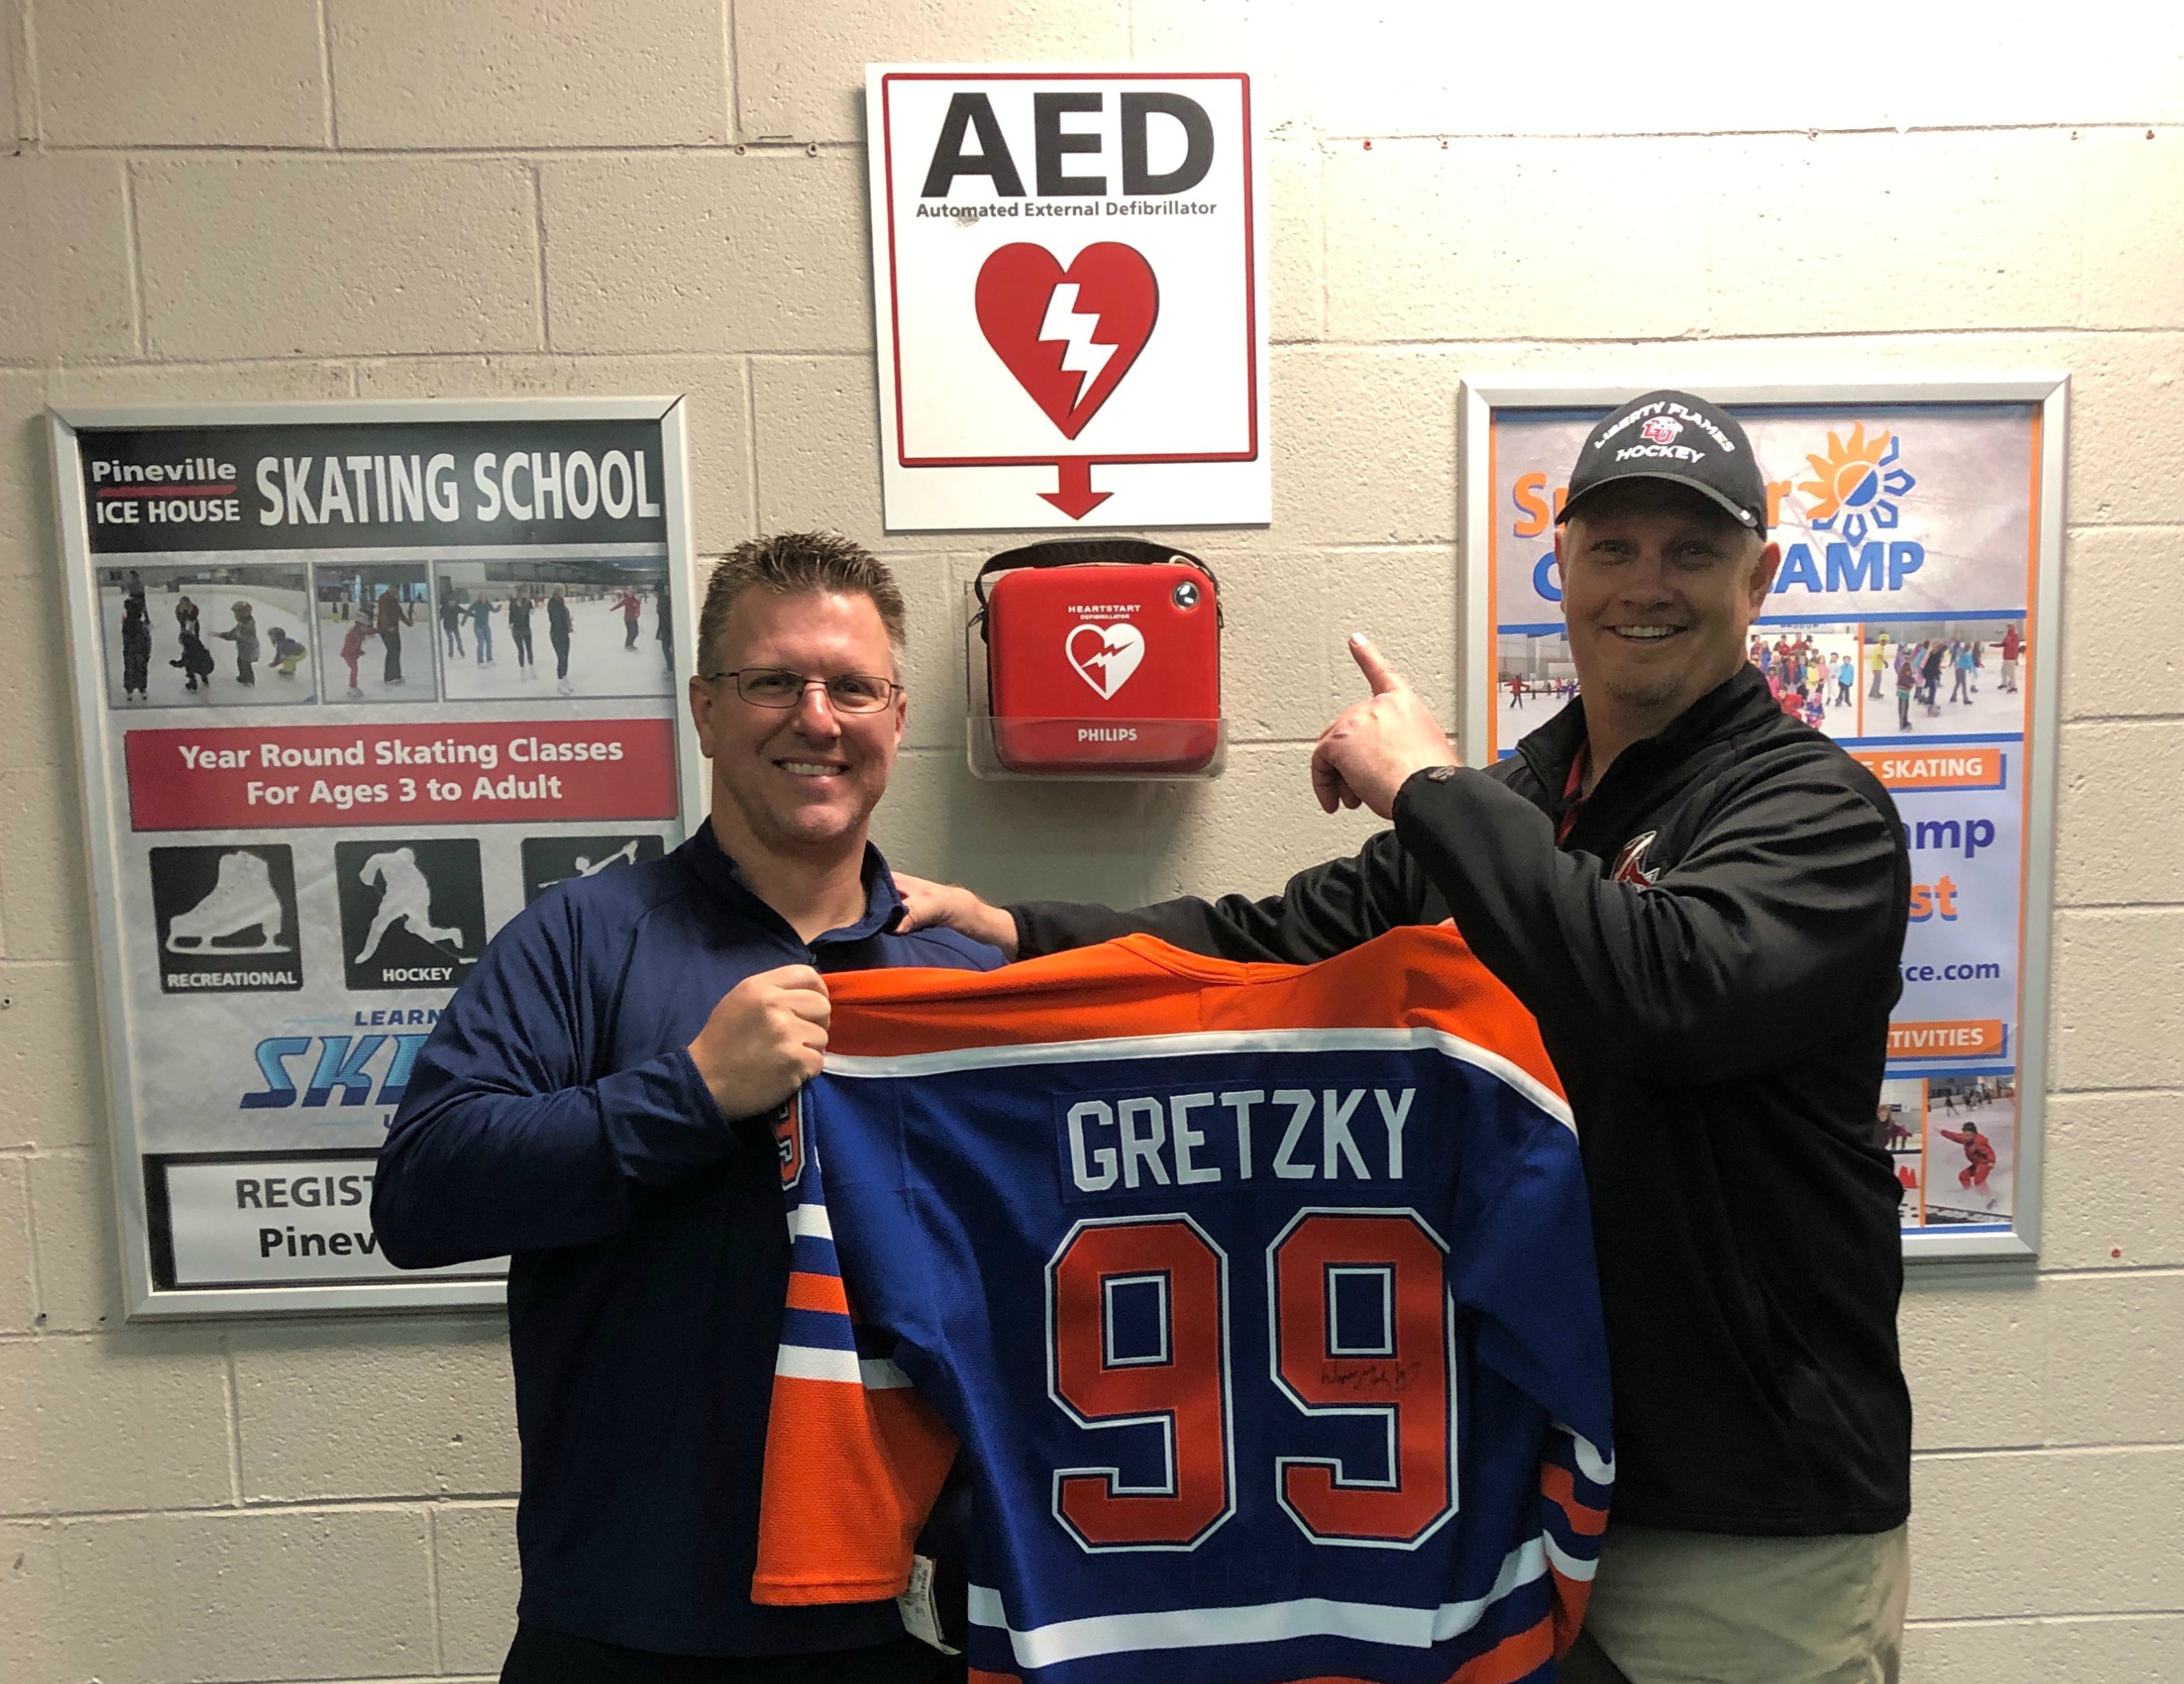 Jib Street (right) and Dr. Craig Bryant at the Pineville Ice House. The signed Wayne Gretzky jersey was Jib&#039;s thank-you gift to Craig for using the AED to save his life. (Photo courtesy of Jib Street)